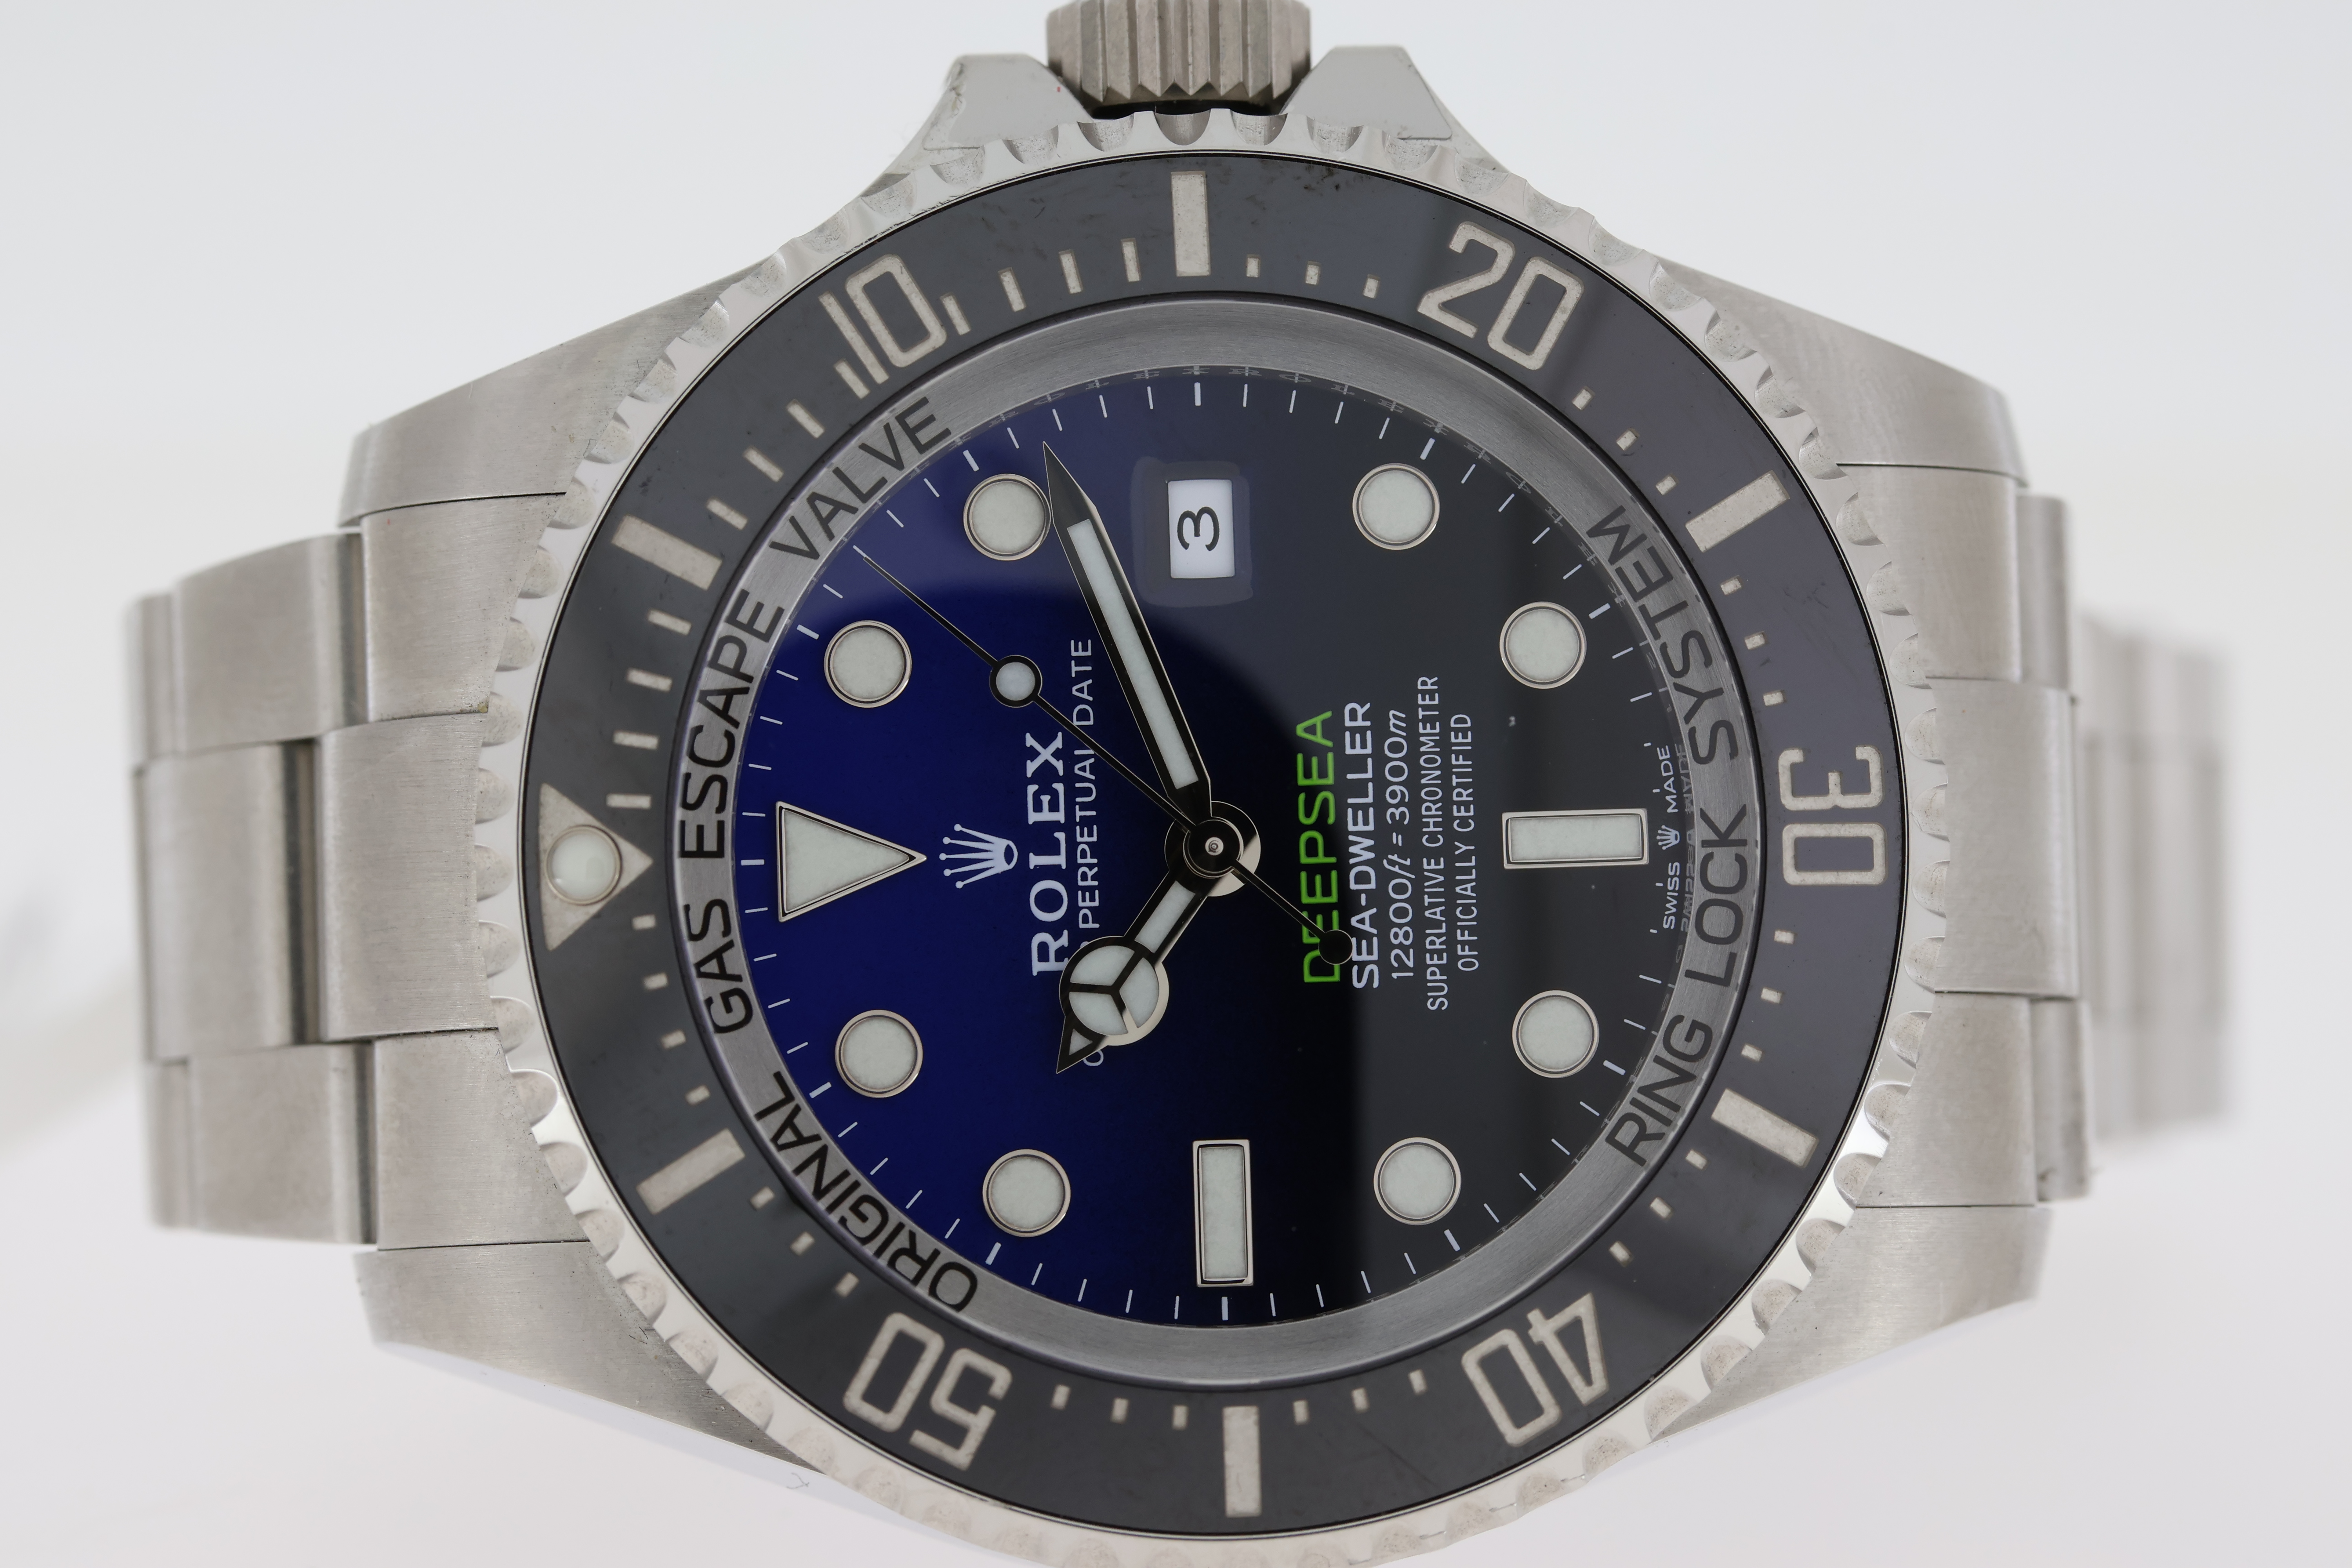 ROLEX SEA DWELLER DEEPSEA 'JAMES CAMERON' REFERENCE 126660 WITH PAPERS 2022 - Image 4 of 6